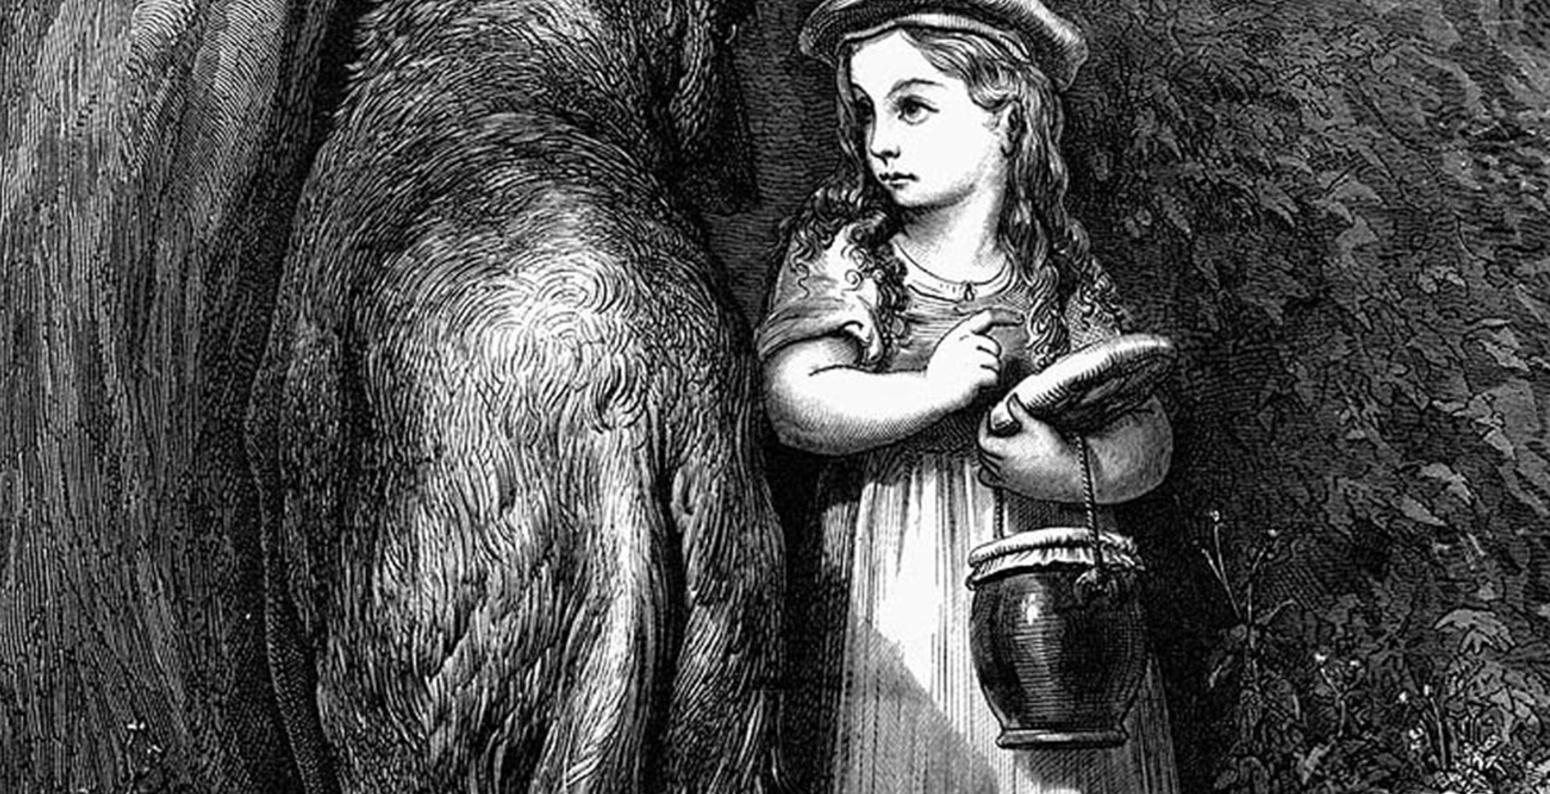 Illustration of red riding hood and wolf. 